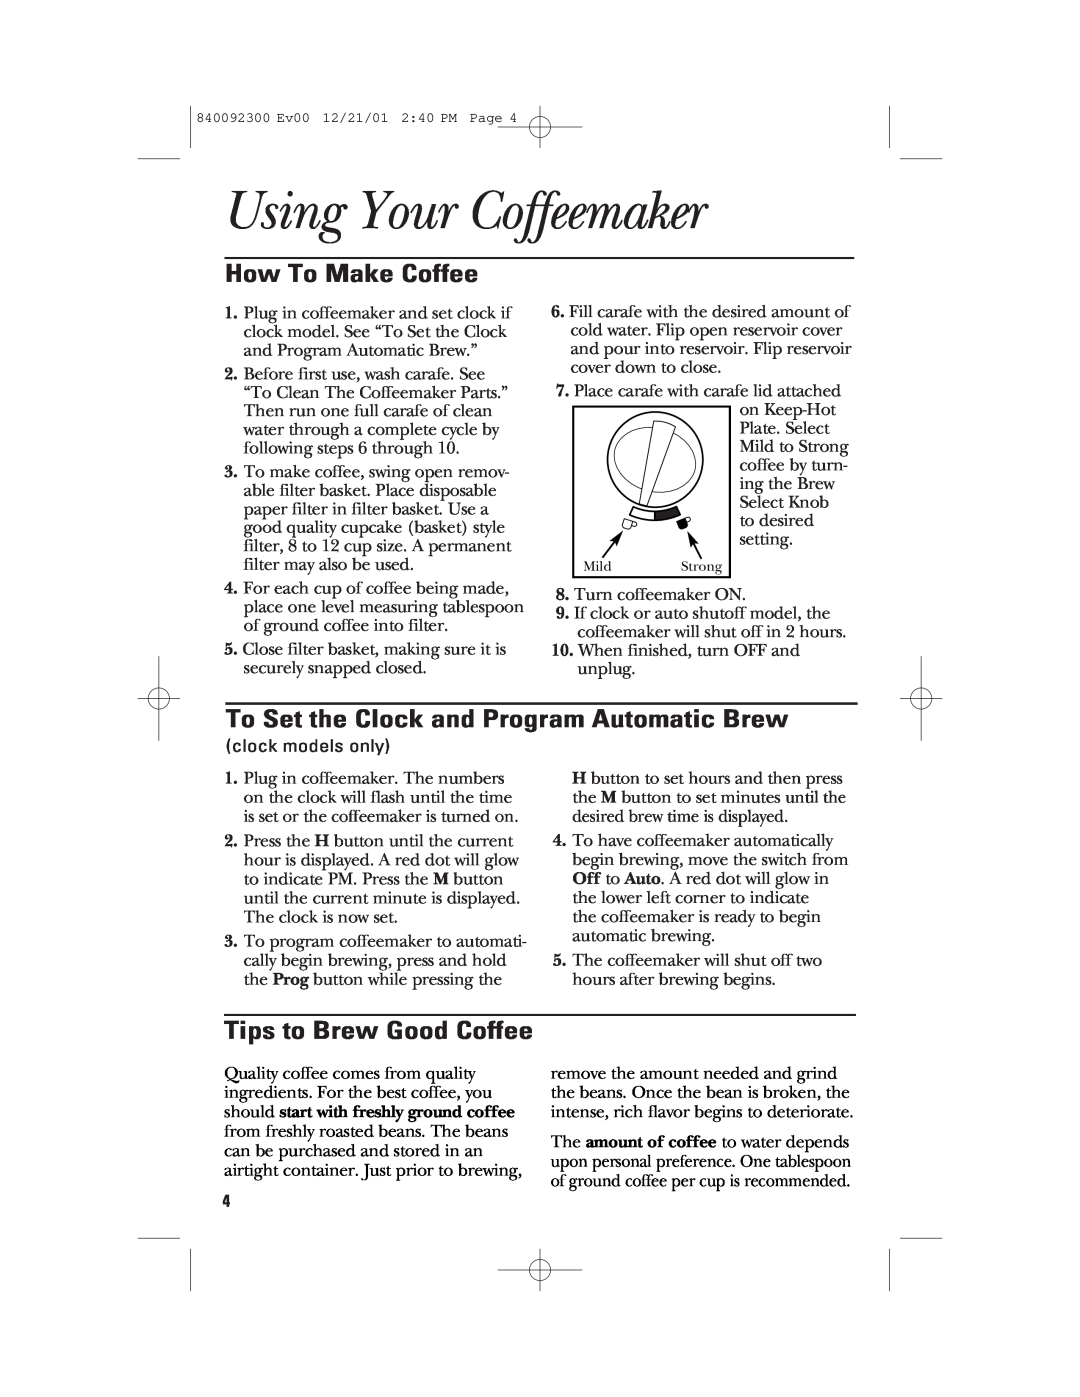 GE 840092300, 106804 manual Using Your Coffeemaker, How To Make Coffee, To Set the Clock and Program Automatic Brew 